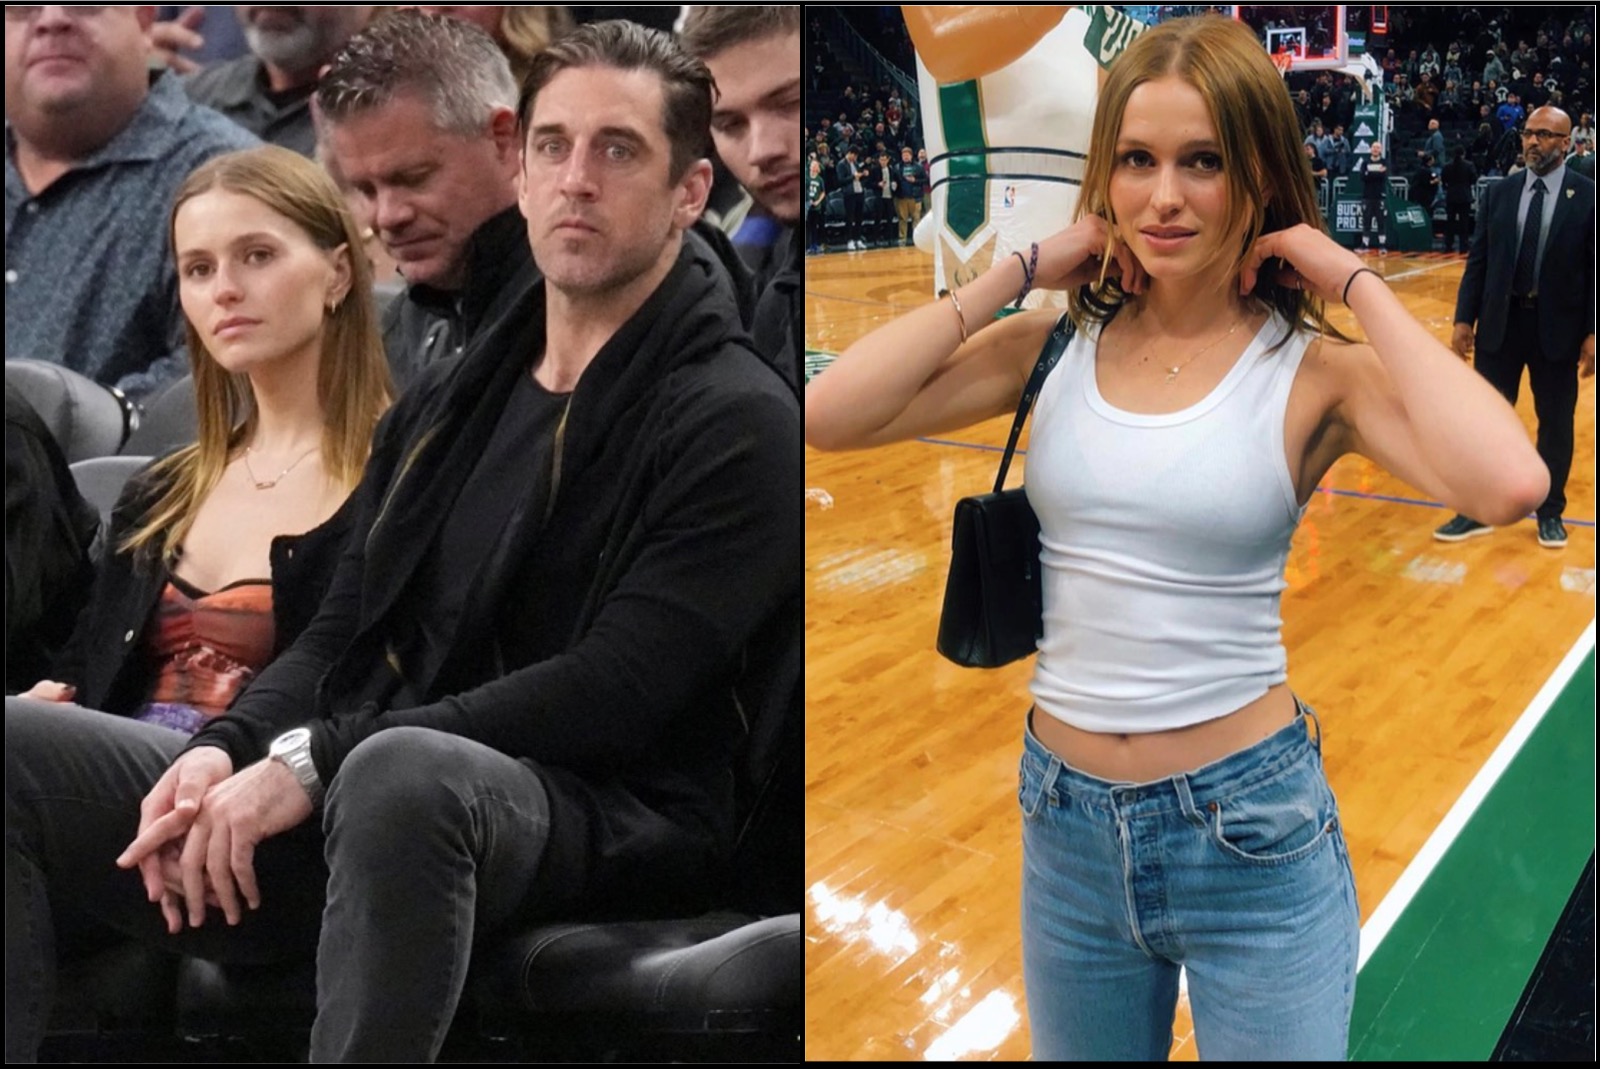 Jets Qb Aaron Rodgers And Bucks Owner Mallory Edens Go Out On Date At